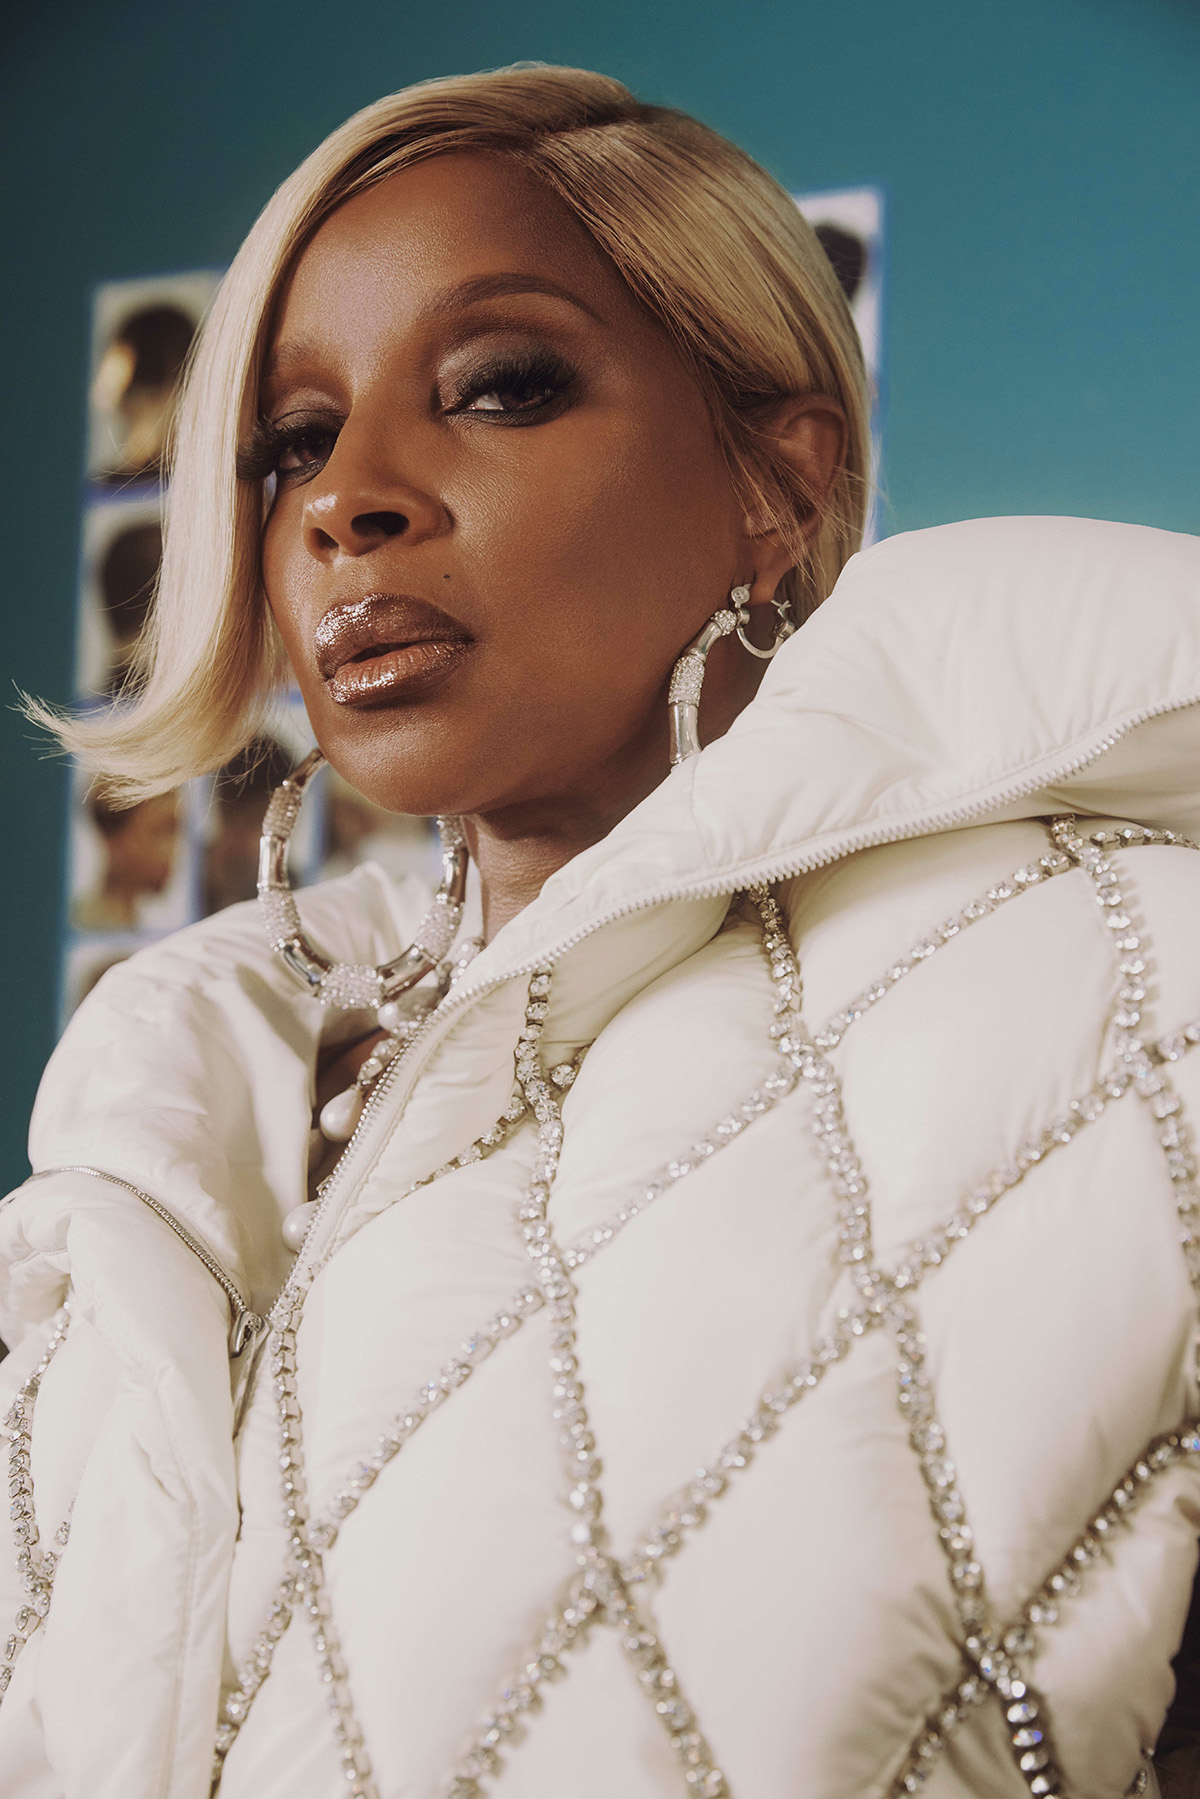 Mary J. Blige covers Elle US February 2022 by Adrienne Raquel